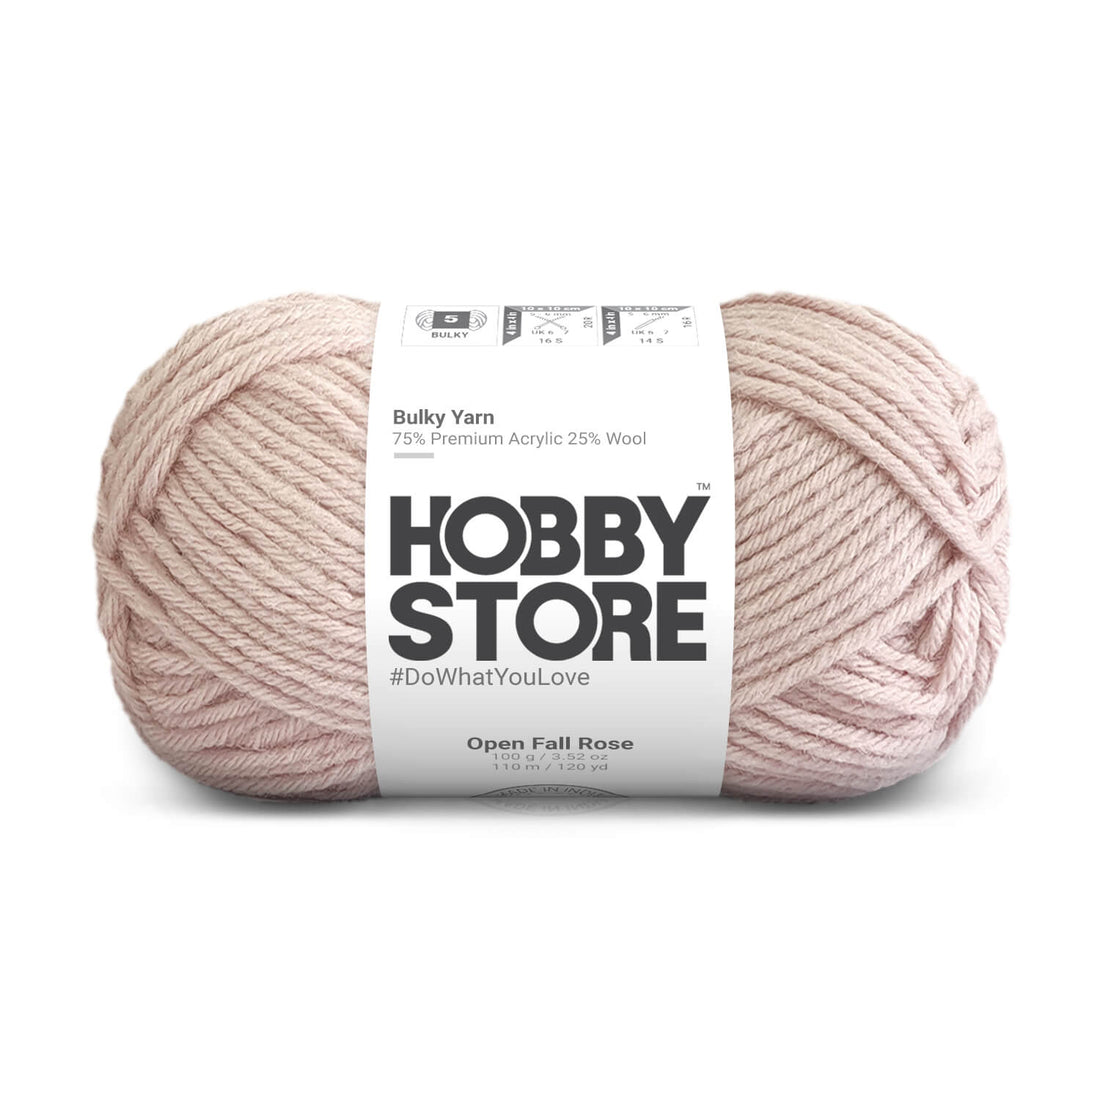 Bulky Yarn by Hobby Store - Open Fall Rose 6024